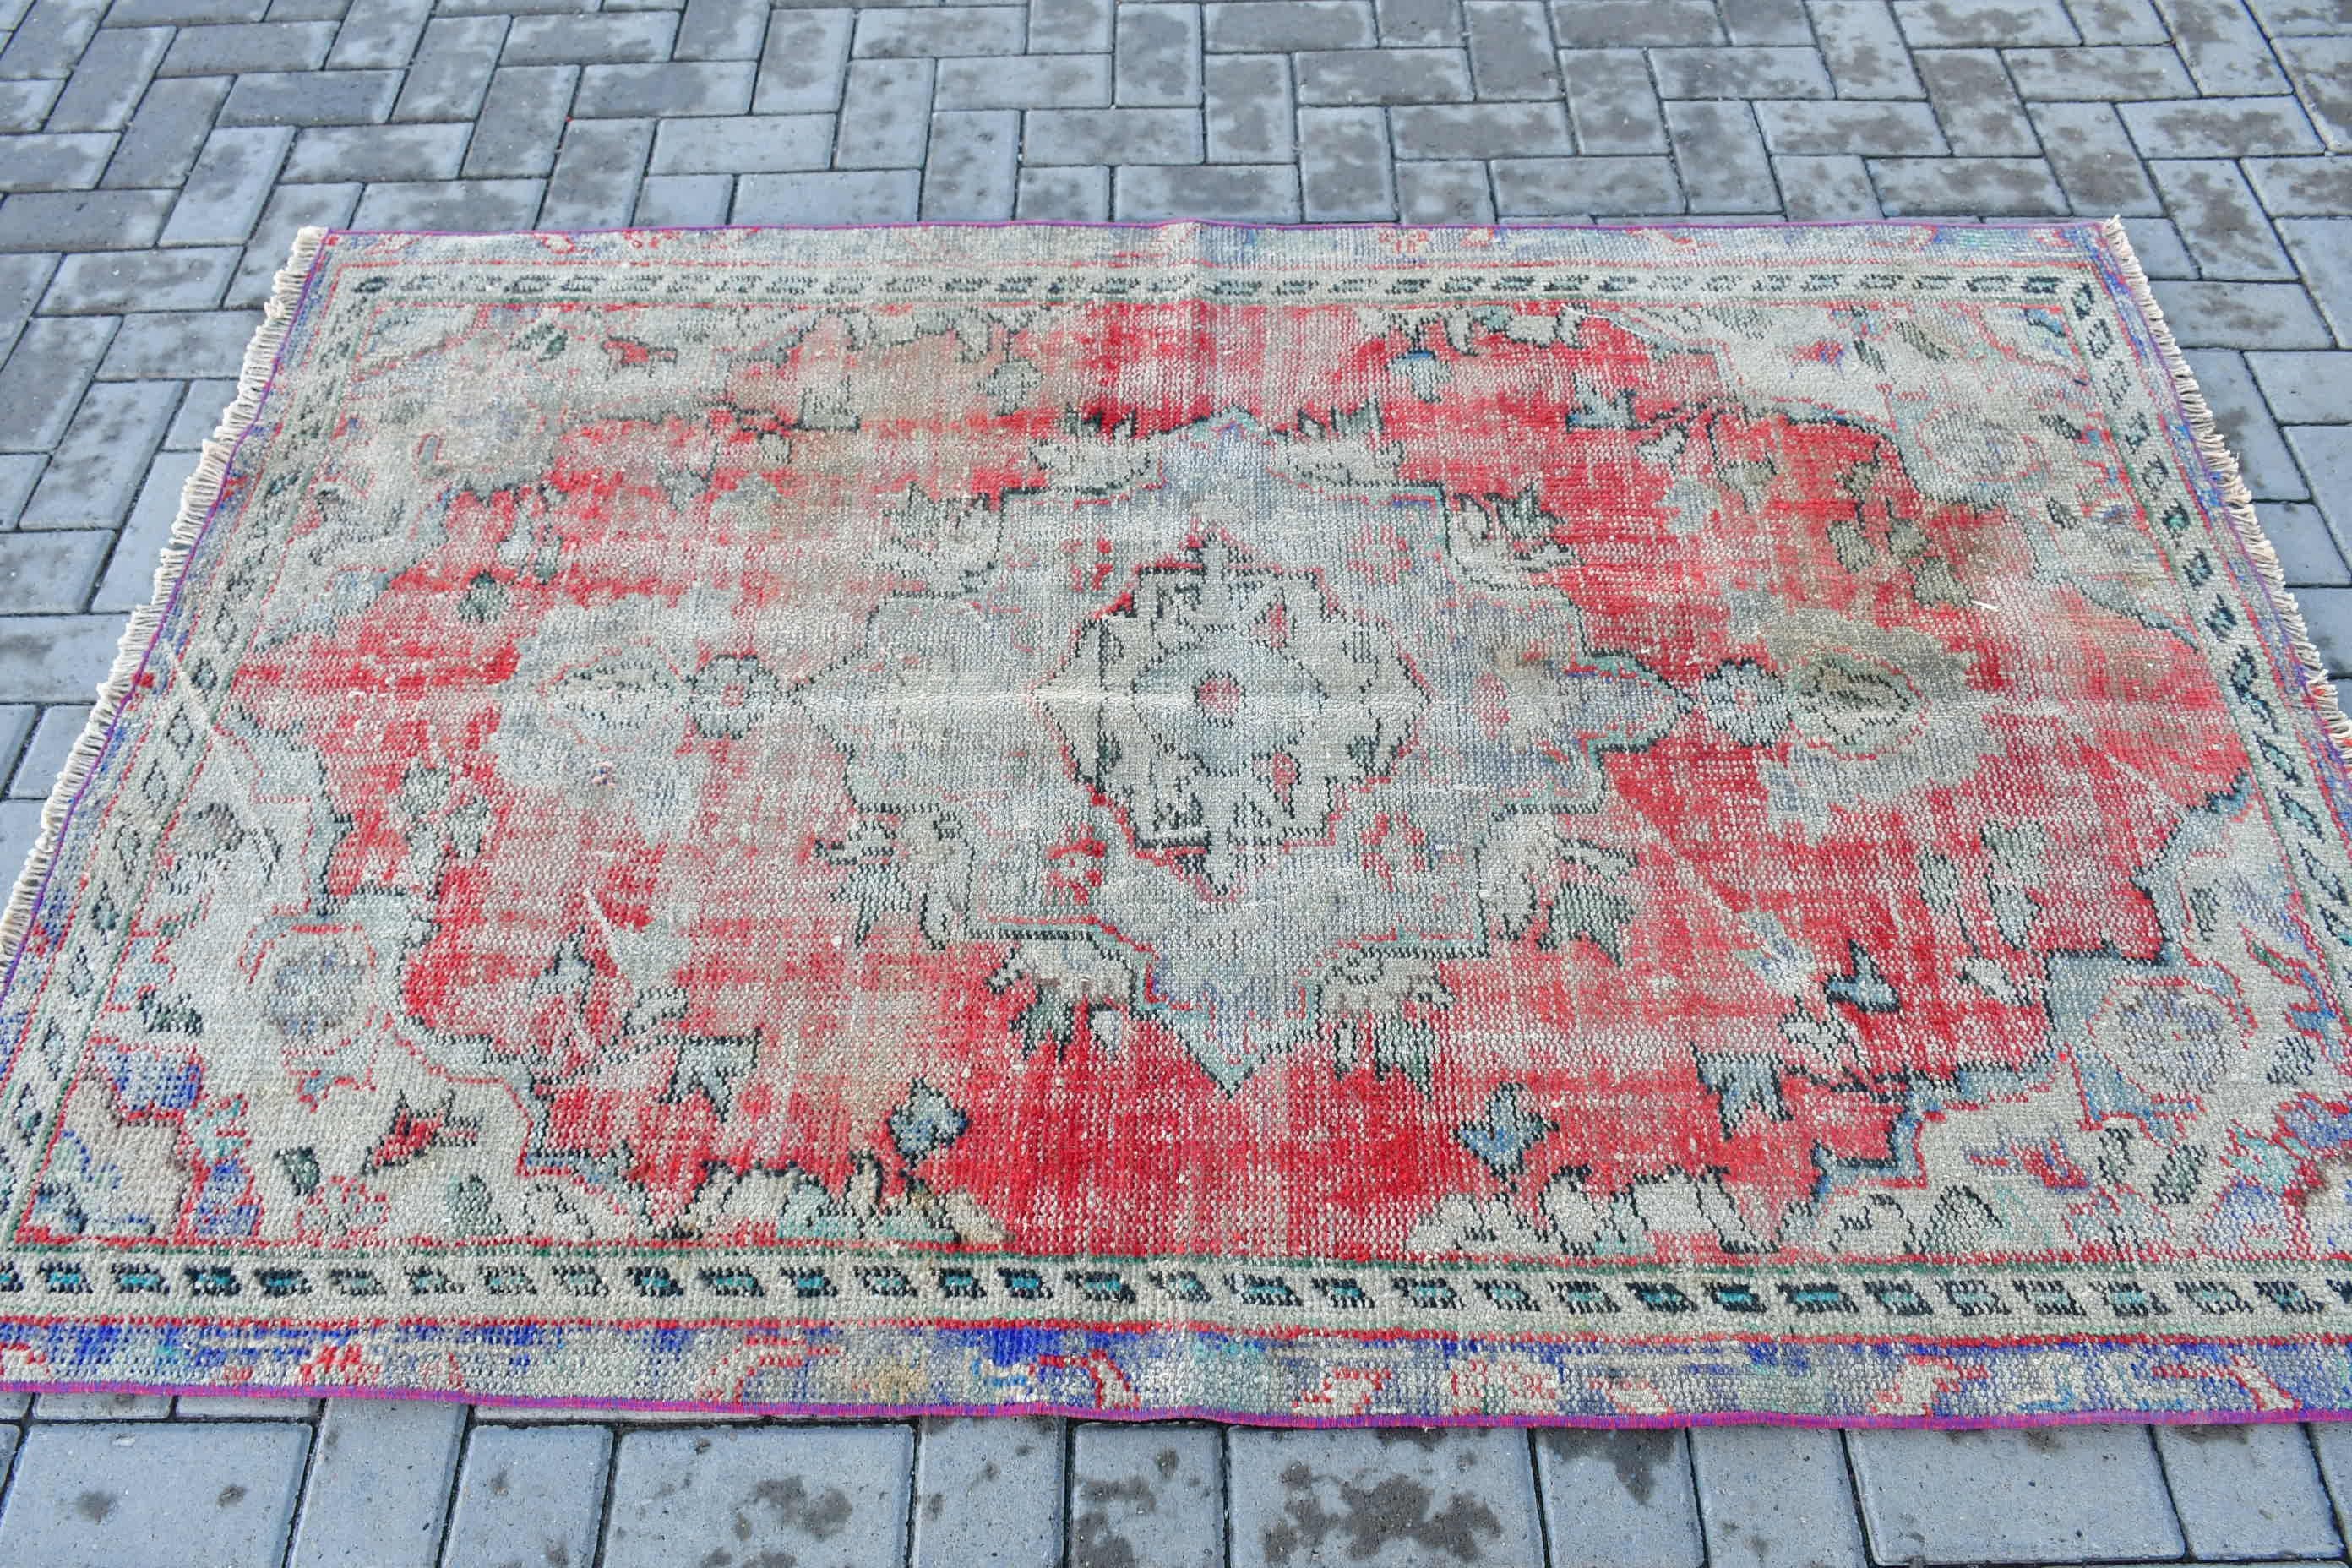 Red Anatolian Rug, Turkish Rug, Antique Rugs, Handwoven Rug, 4x6.1 ft Area Rugs, Home Decor Rug, Vintage Rug, Dining Room Rugs, Indoor Rug